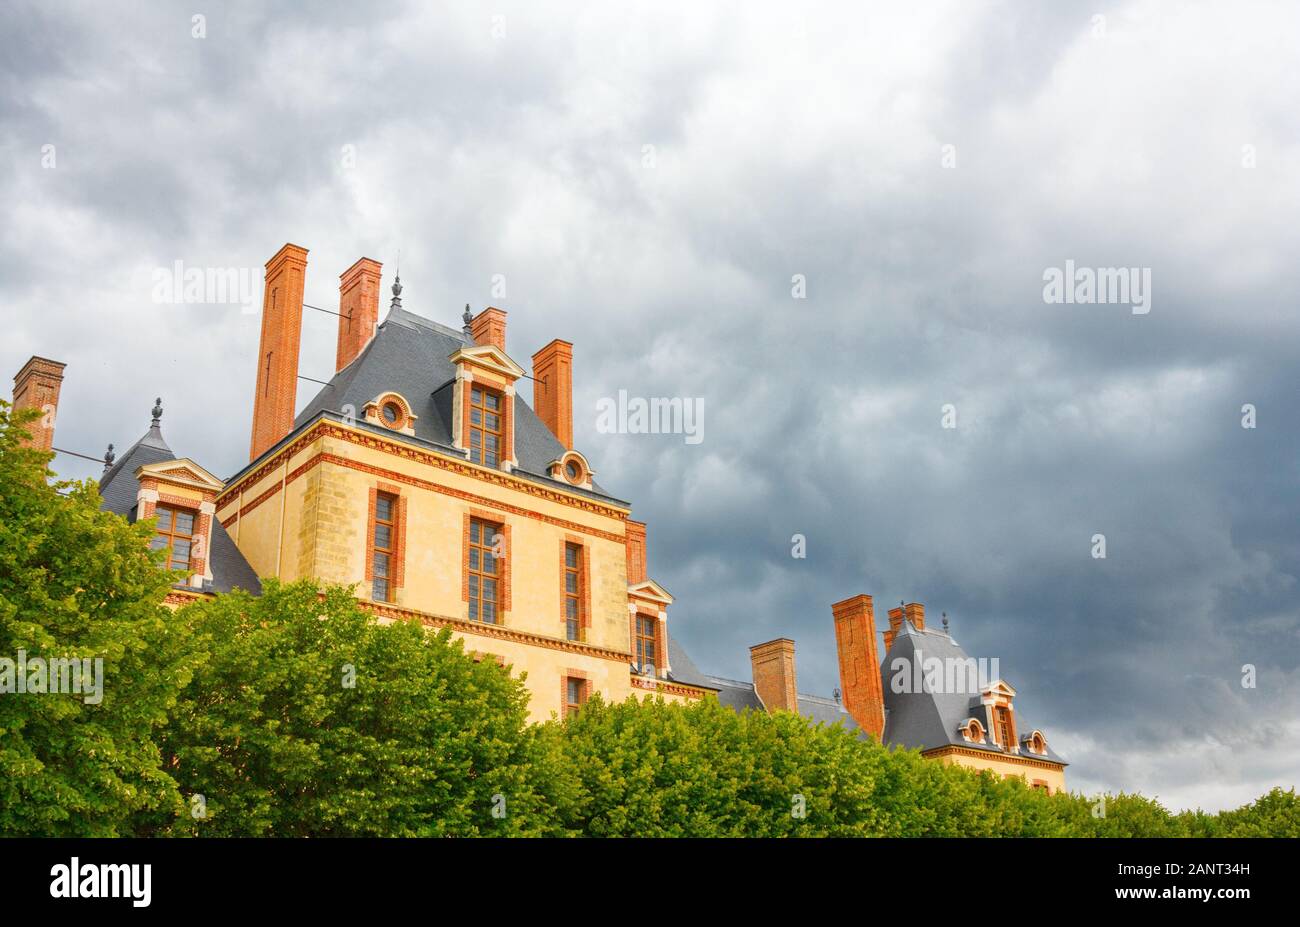 View of the Cour des Offices building, part of the Chateau de Fontainebleau (Palace of Fontainebleau), under a dramatic cloudy sky. France. Stock Photo